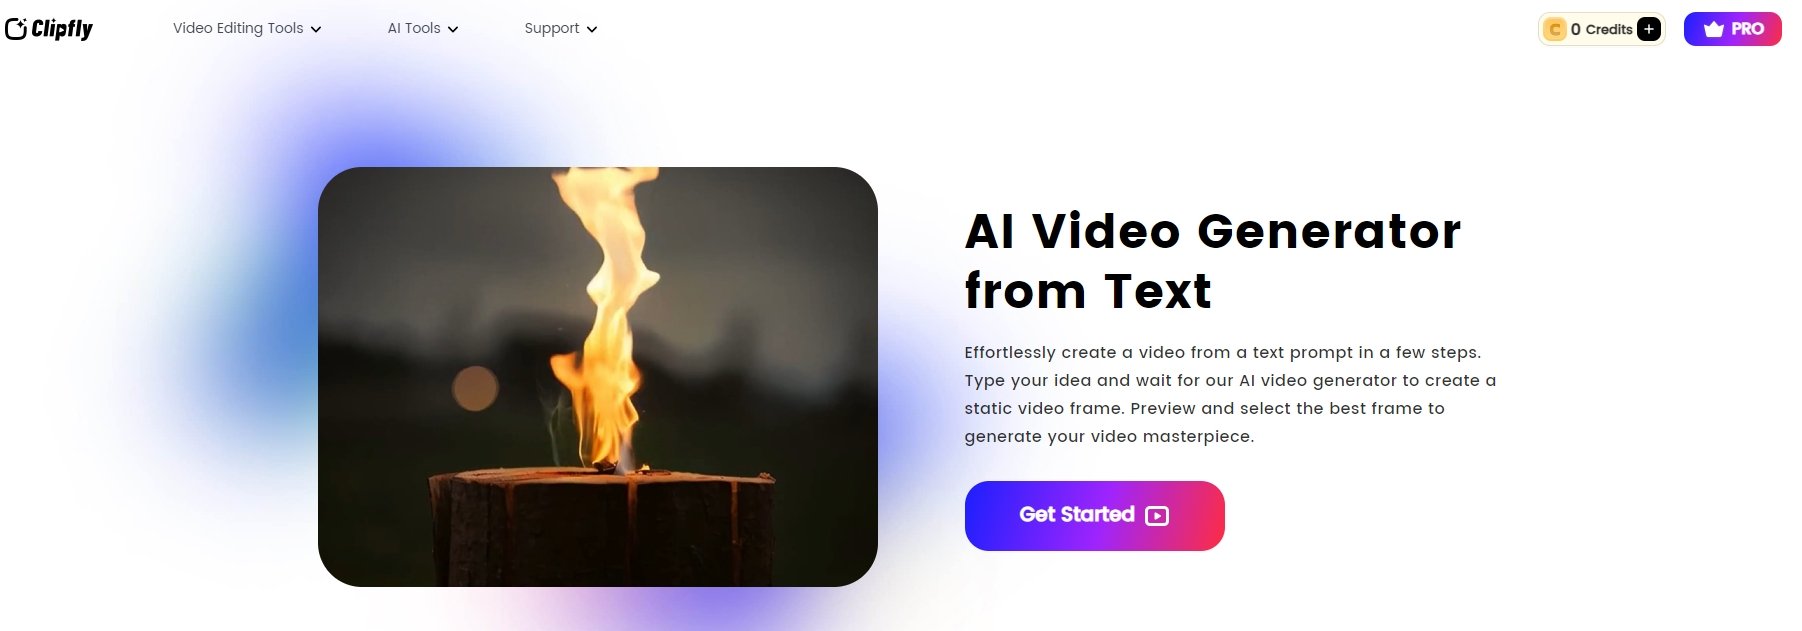 clipfly video generator online application screenshot cover